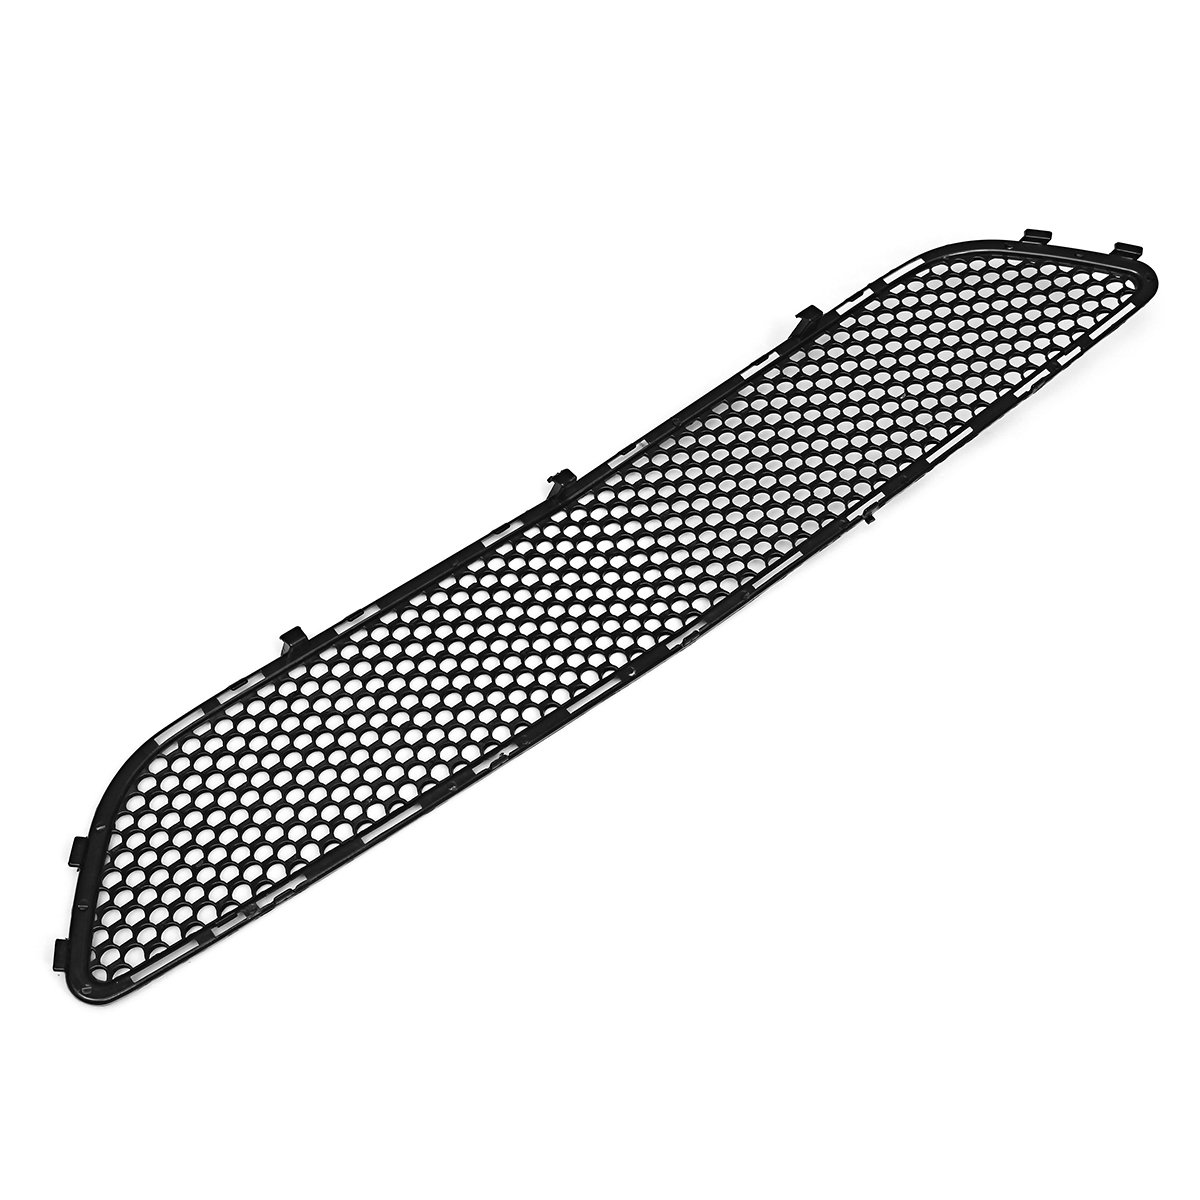 Car Front Grill Grill Bumper Protector for AMG Mercedes-Benz C Class W204 2007-2011